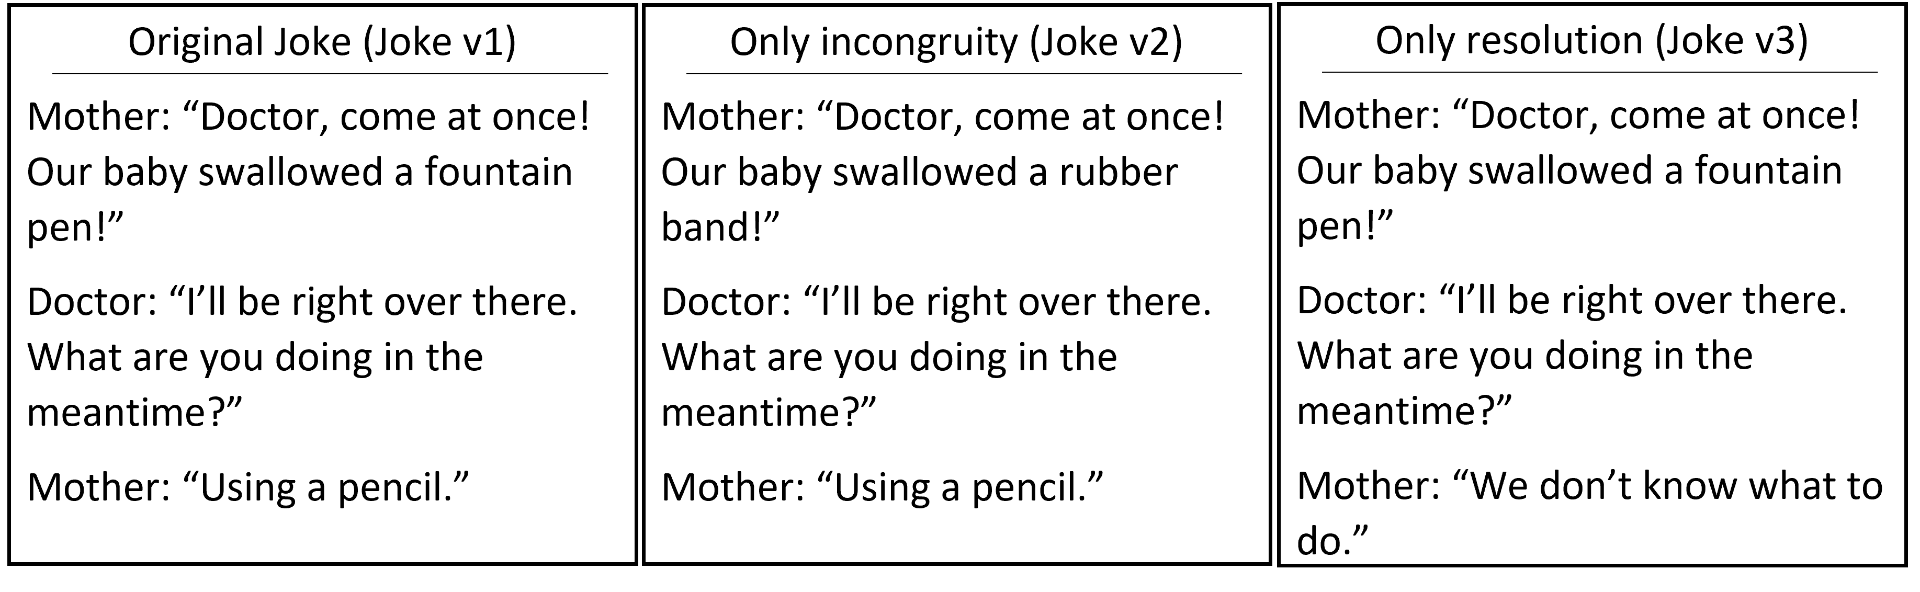 Image shows three text boxes separated by vertical lines. Each textbox is a short conversation between a mother and a doctor. The first textbox is titled, 'Original Joke', that is, Joke version 1. In it, the mother says, "Doctor, come at once! Our baby swallowed a fountain pen!". The doctor says, "I will be right over there. What you doing in the meantime?". Mother replies, "using a pencil". This is end of first text box. The second textbox is titled, 'Only incongruity', that is, Joke version 2. In it, the mother says, "Doctor, come at once! Our baby swallowed a rubber band!". The doctor says, "I will be right over there. What you doing in the meantime?". Mother replies, "using a pencil". This is end of second text box. The third textbox is titled, 'Only resolution', that is, Joke version 3. In it, the mother says, "Doctor, come at once! Our baby swallowed a rubber band!". The doctor says, "I will be right over there. What you doing in the meantime?". Mother replies, "We don't know what to do". This is end of second text box. 